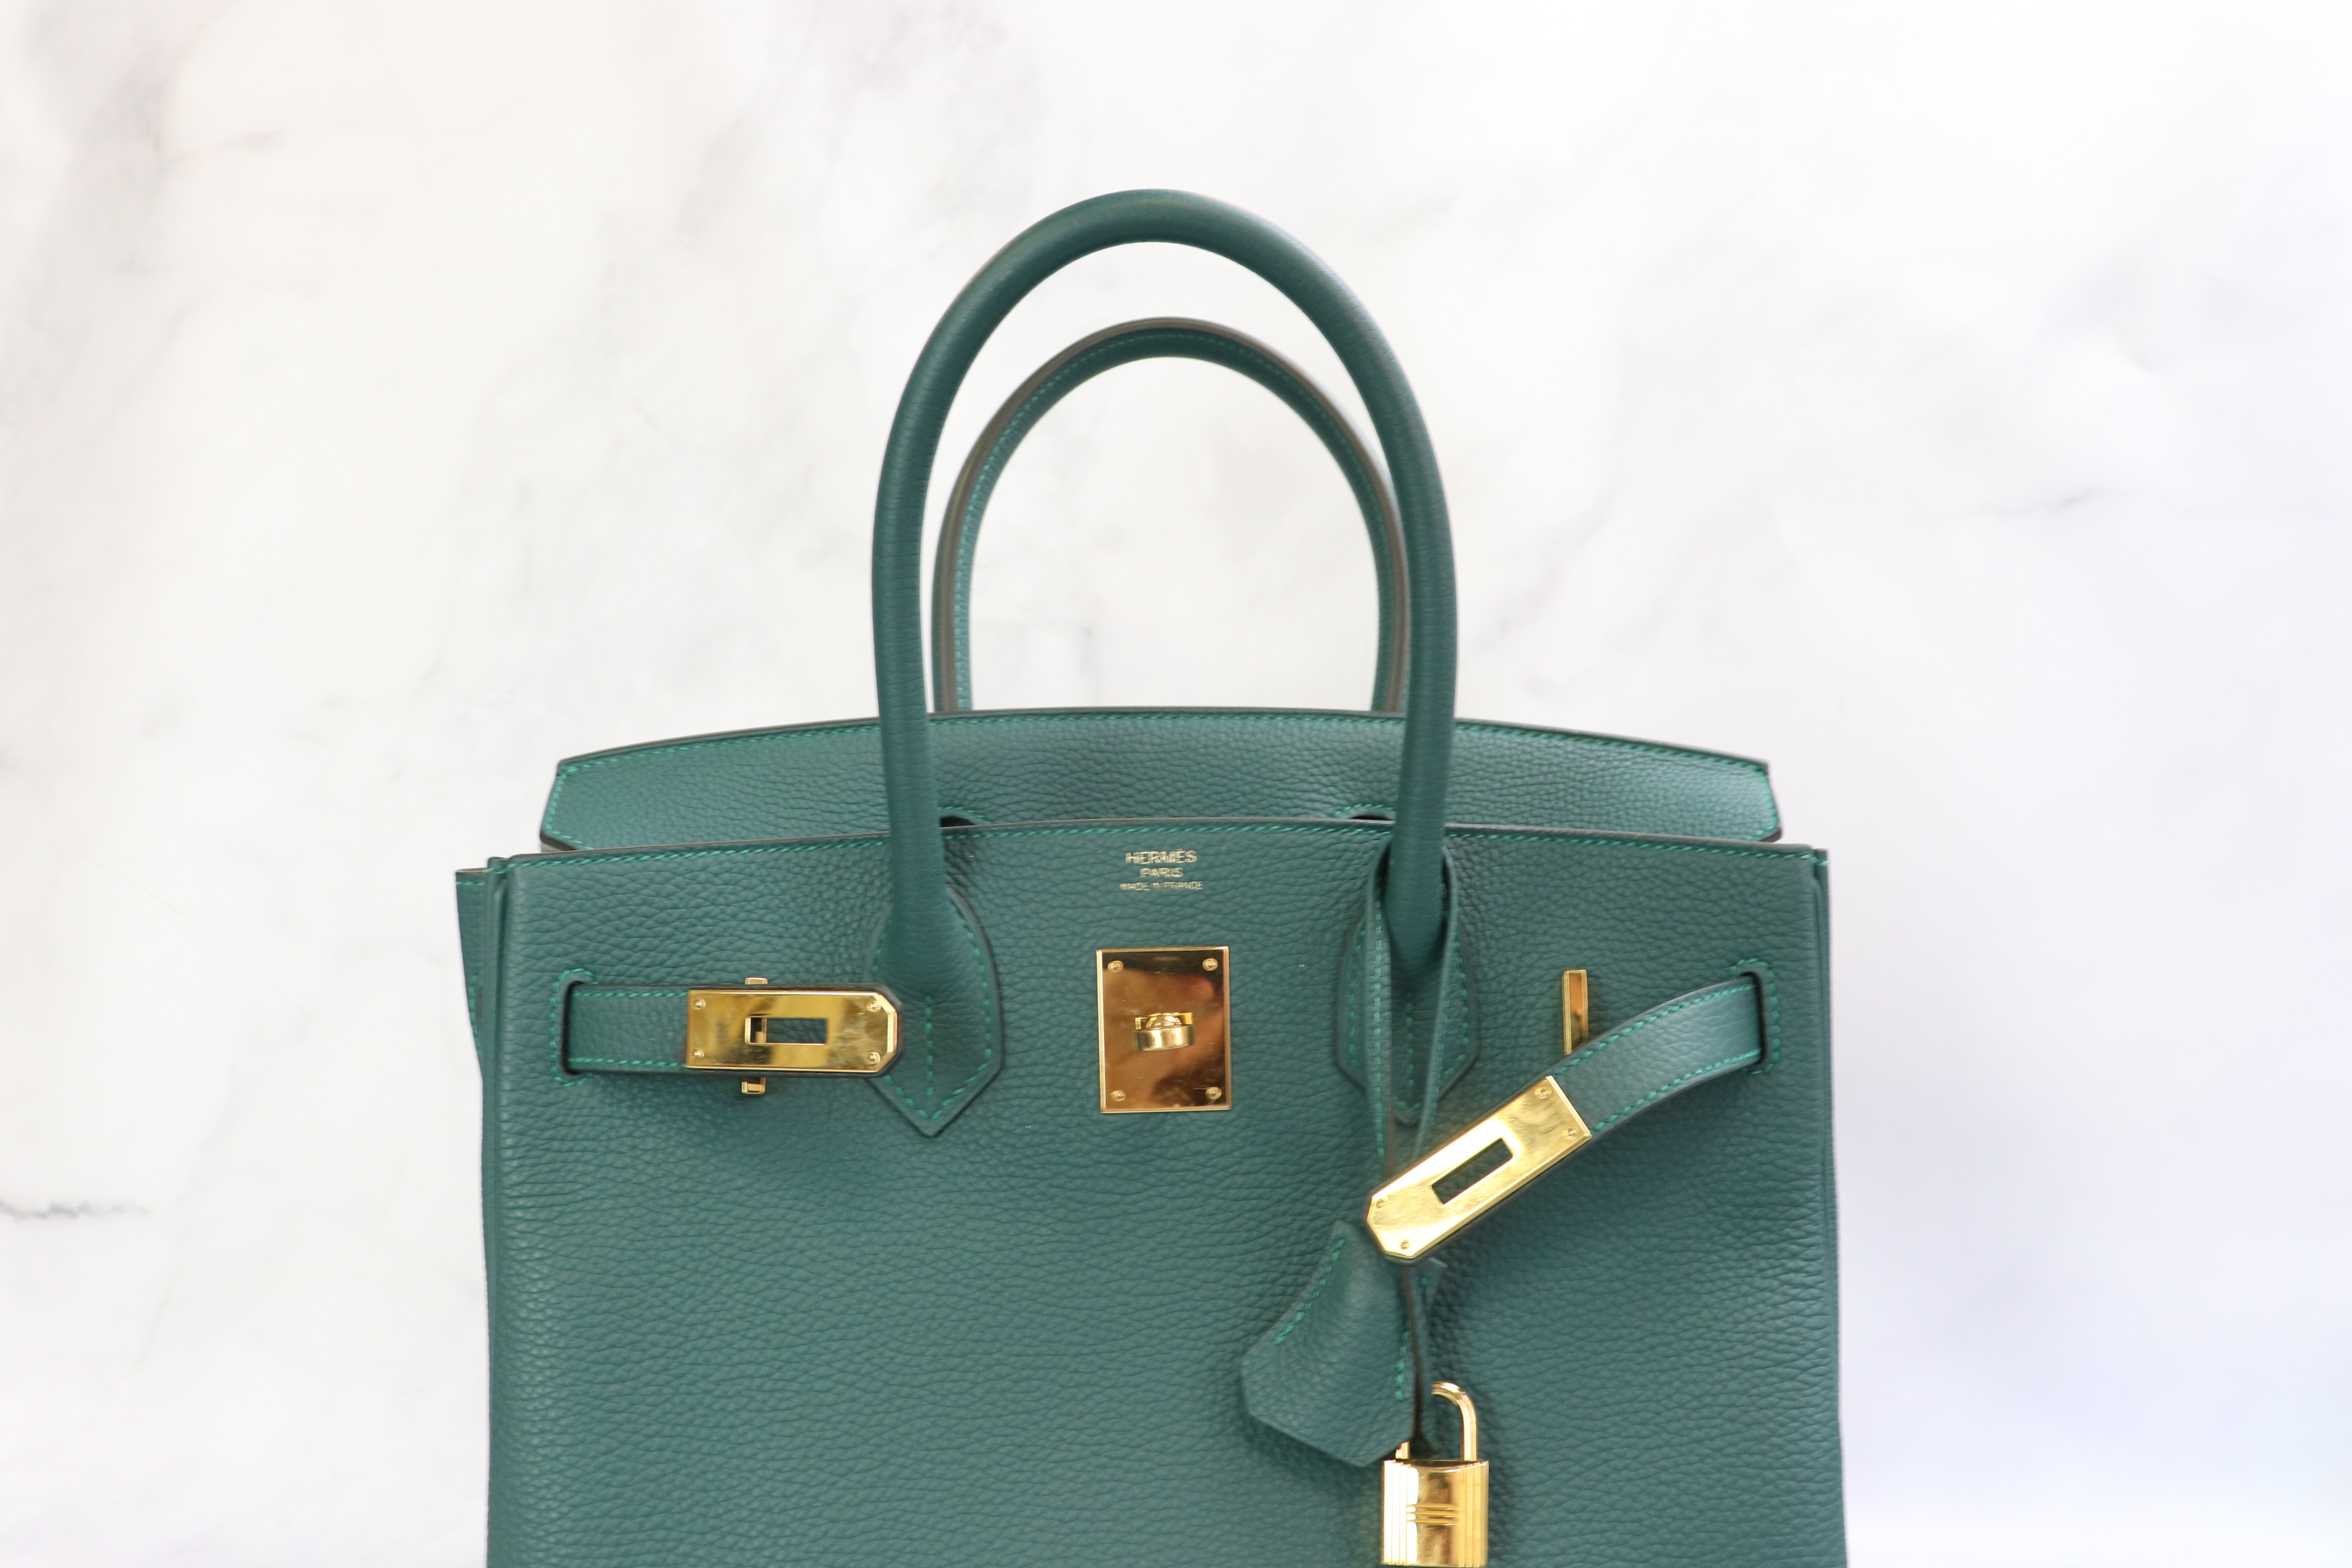 Hermes Birkin 30, Malachite Togo Leather, Gold Hardware, Preowned In  Dustbag (Ships Duty Free From London CS001 - Julia Rose Boston